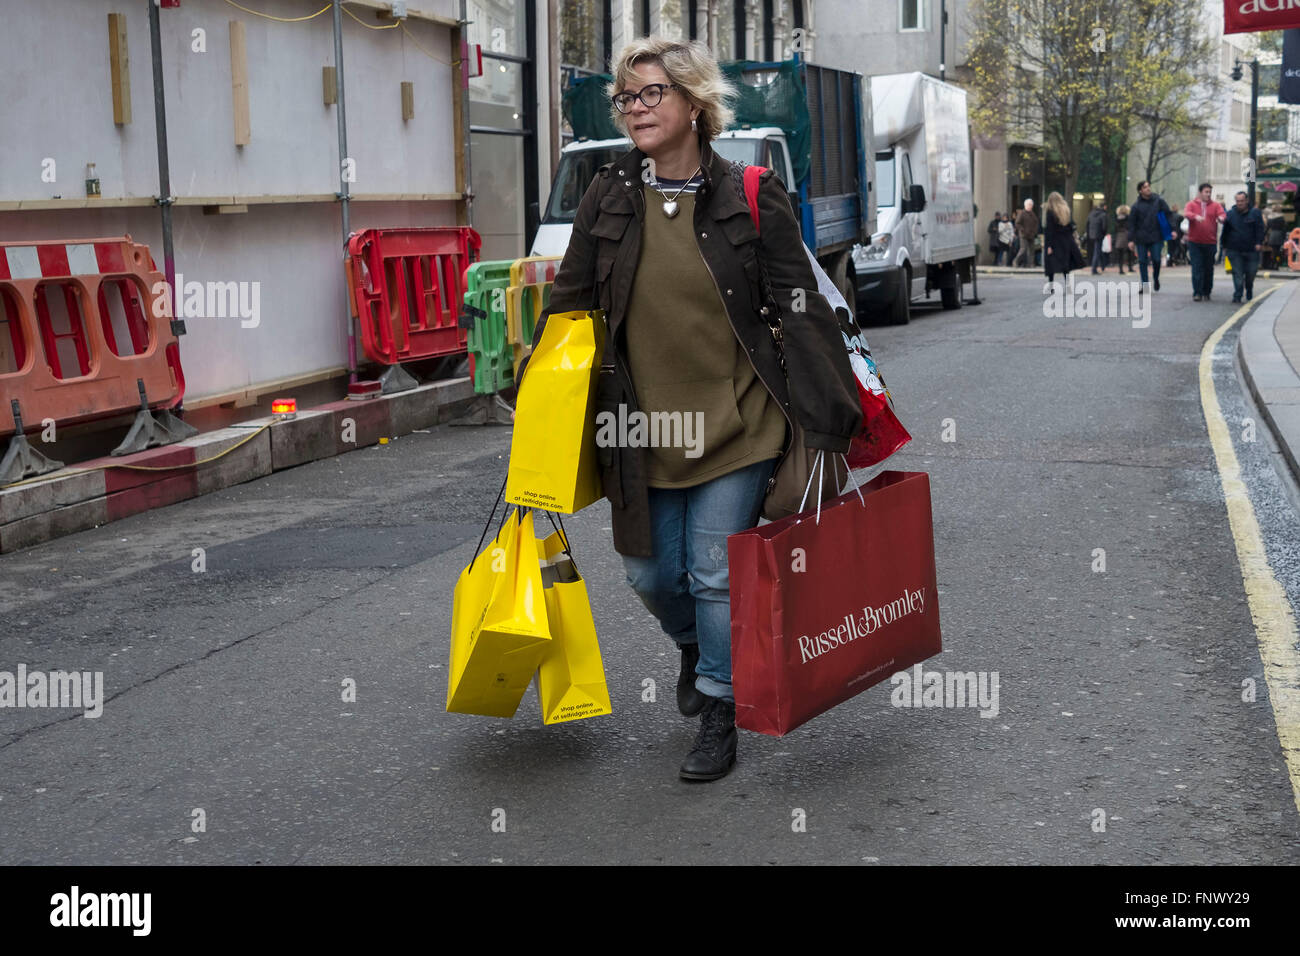 A woman leaves a shopping mall laden with bags, Thursday, Dec. 15, 2005,  after shopping at T.J. Maxx in the Chelsea neighborhood of New York. A  record plunge in the cost of